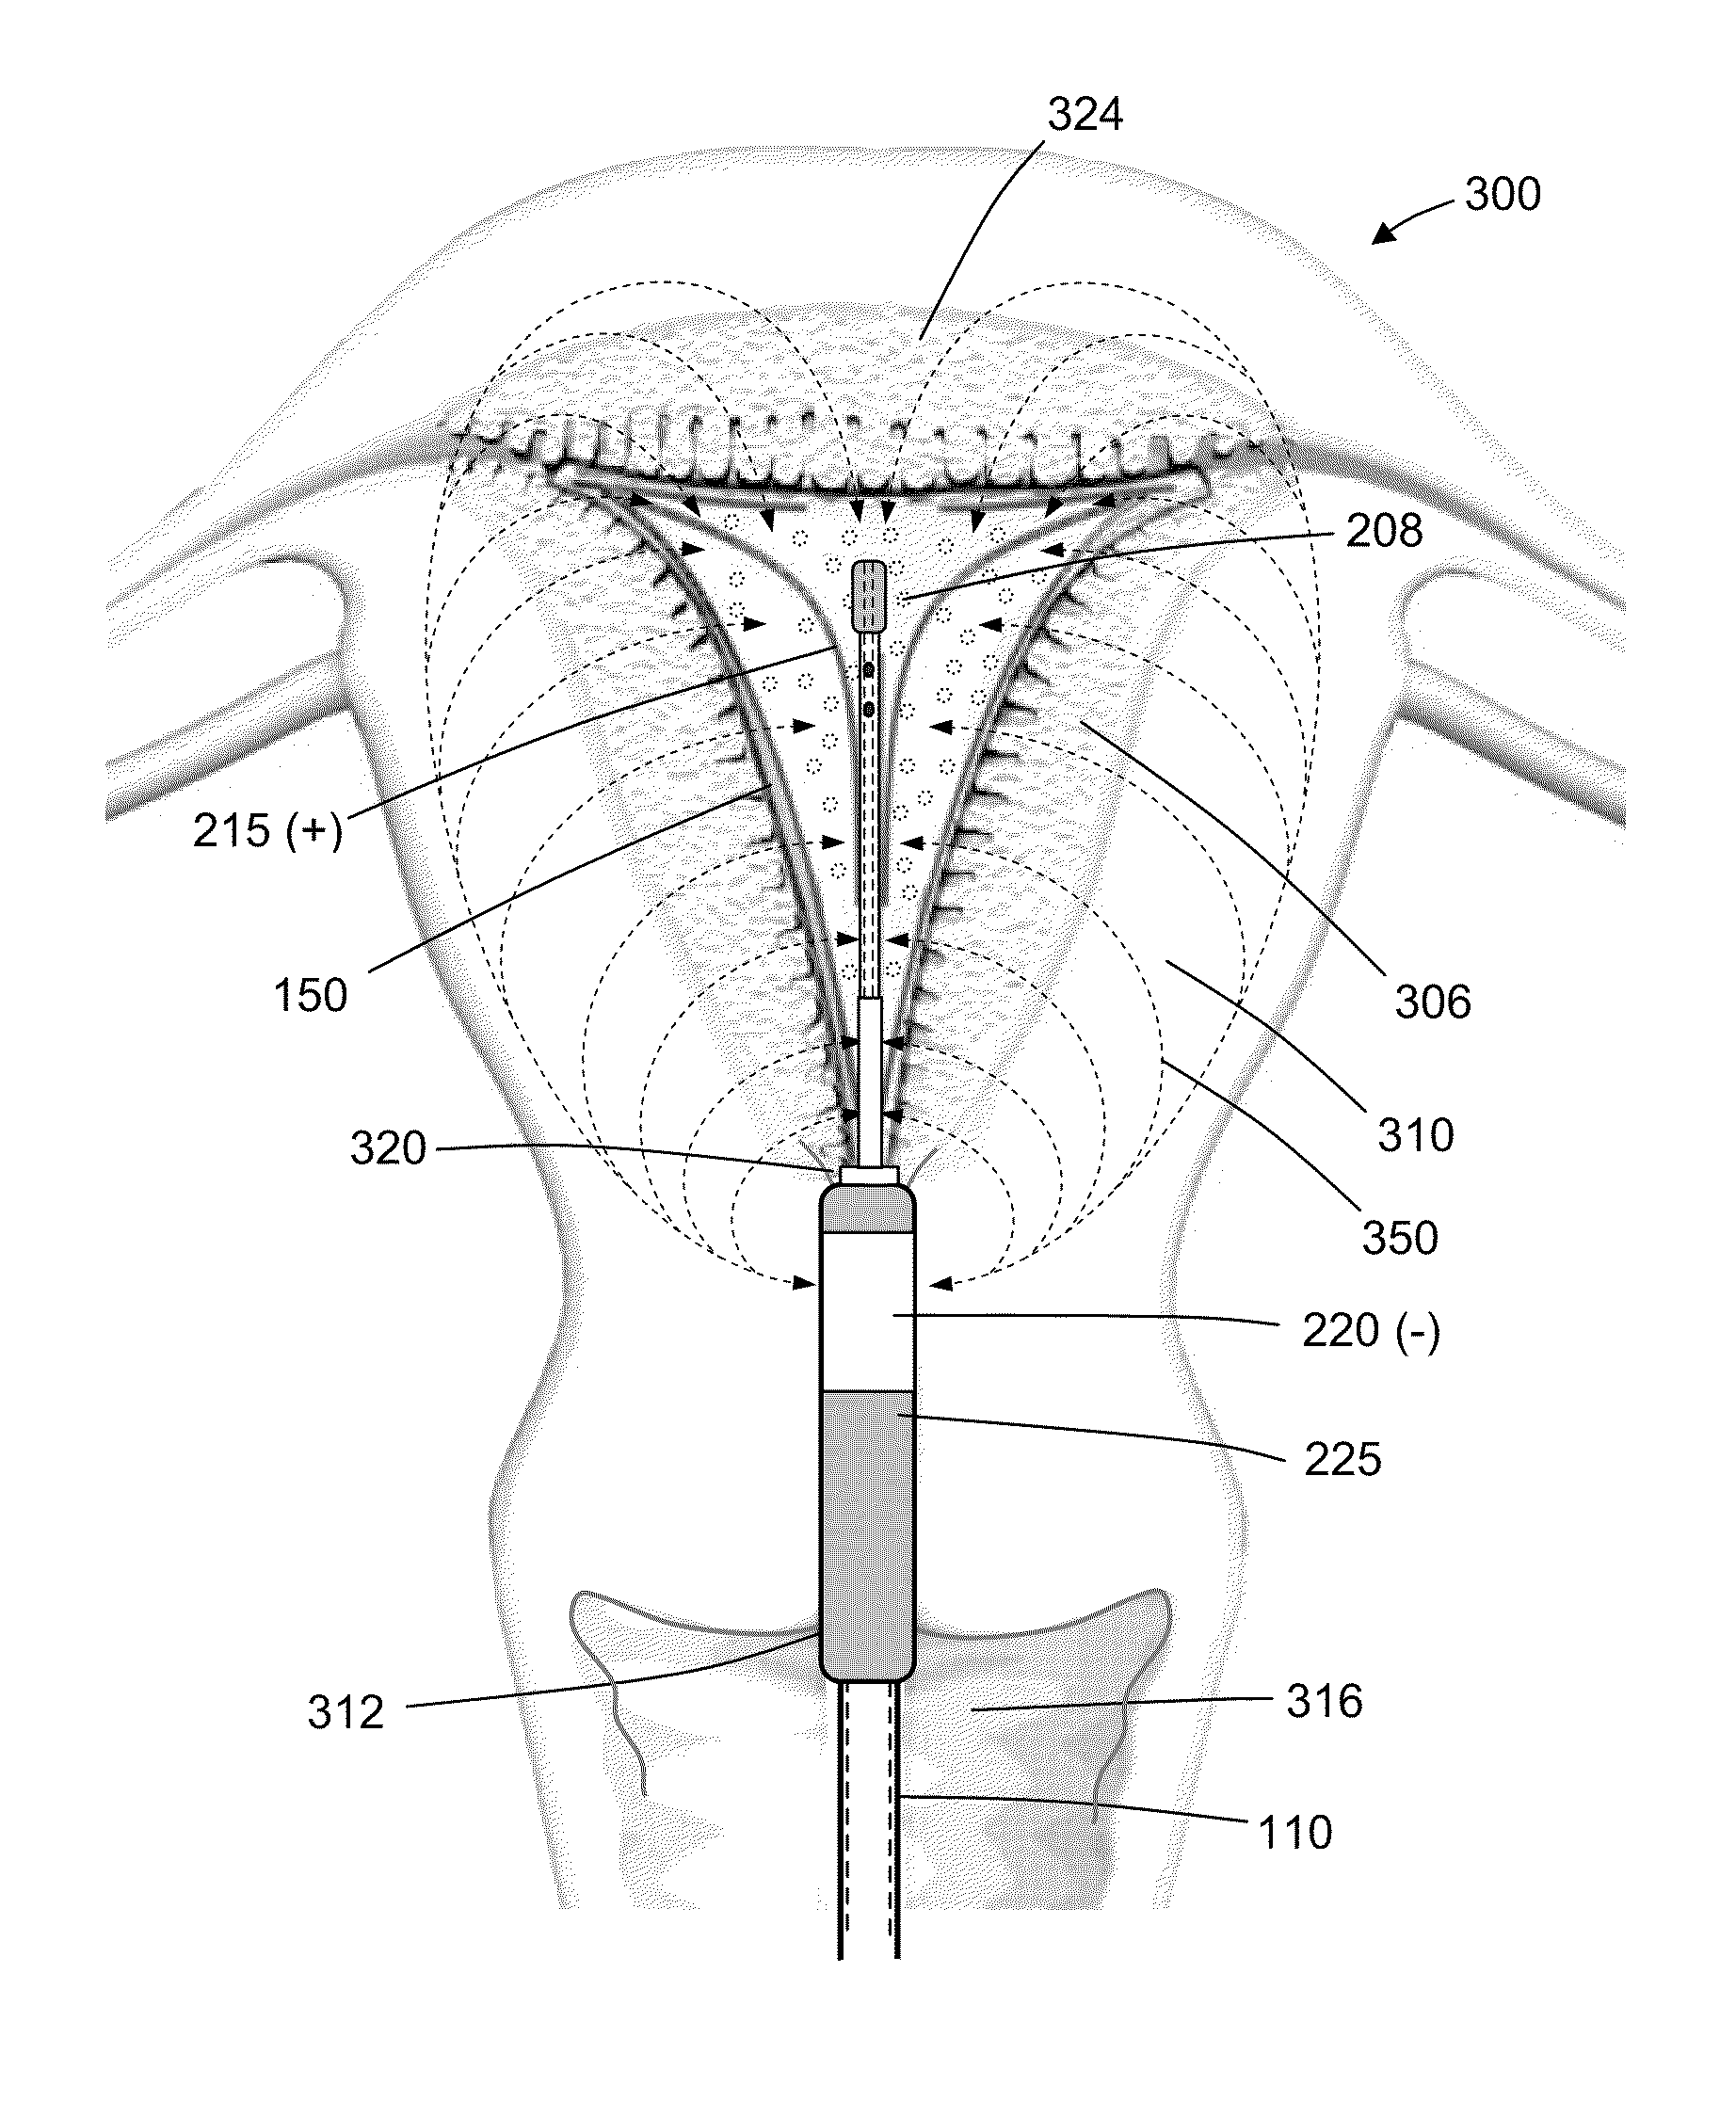 Methods for evaluating the integrity of a uterine cavity